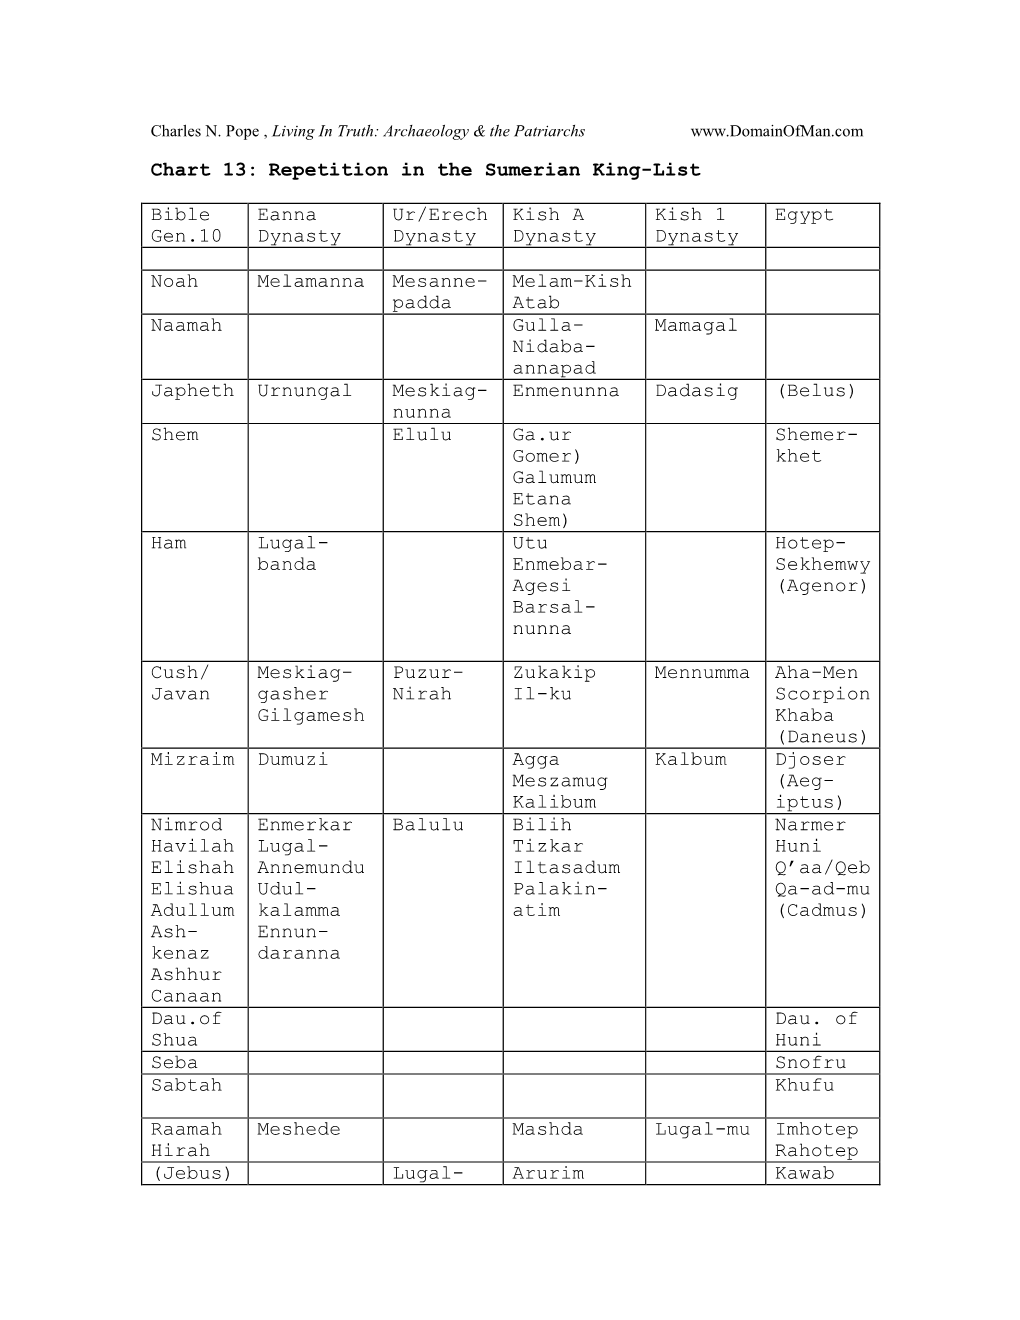 Chart 13: Repetition in the Sumerian King-List